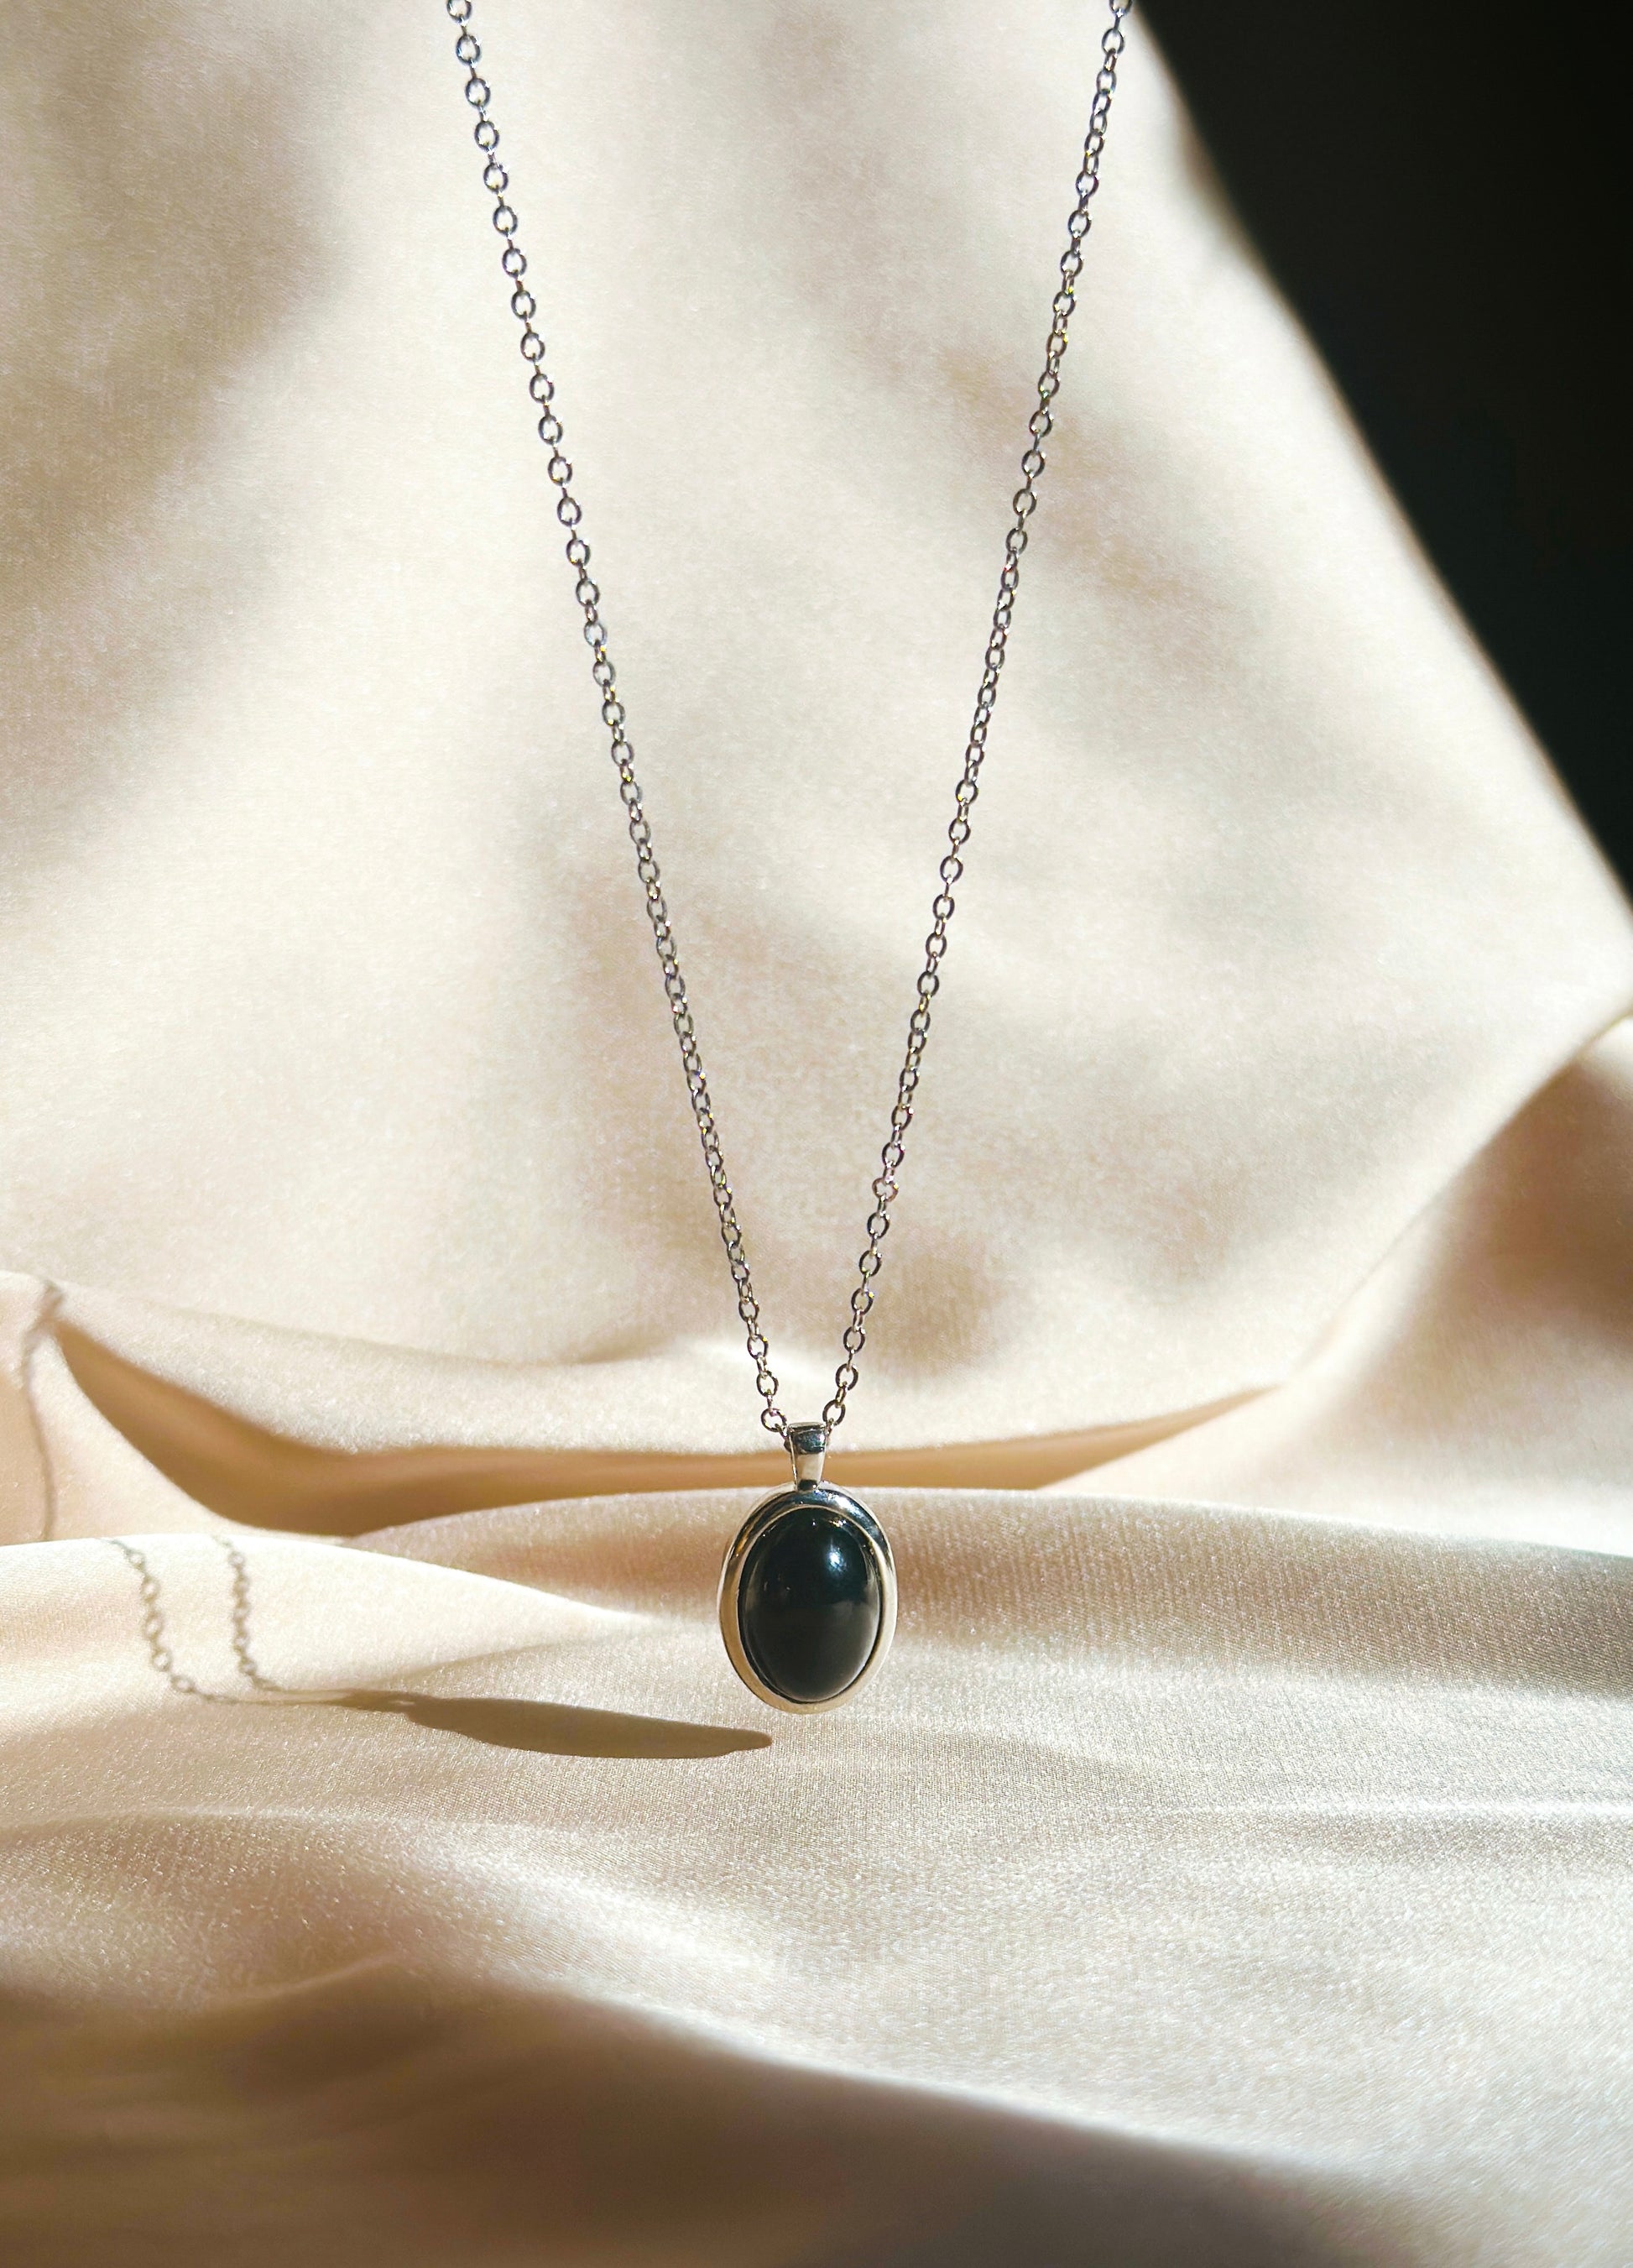 Sterling silver necklace with an Onyx Pendant for energy protection